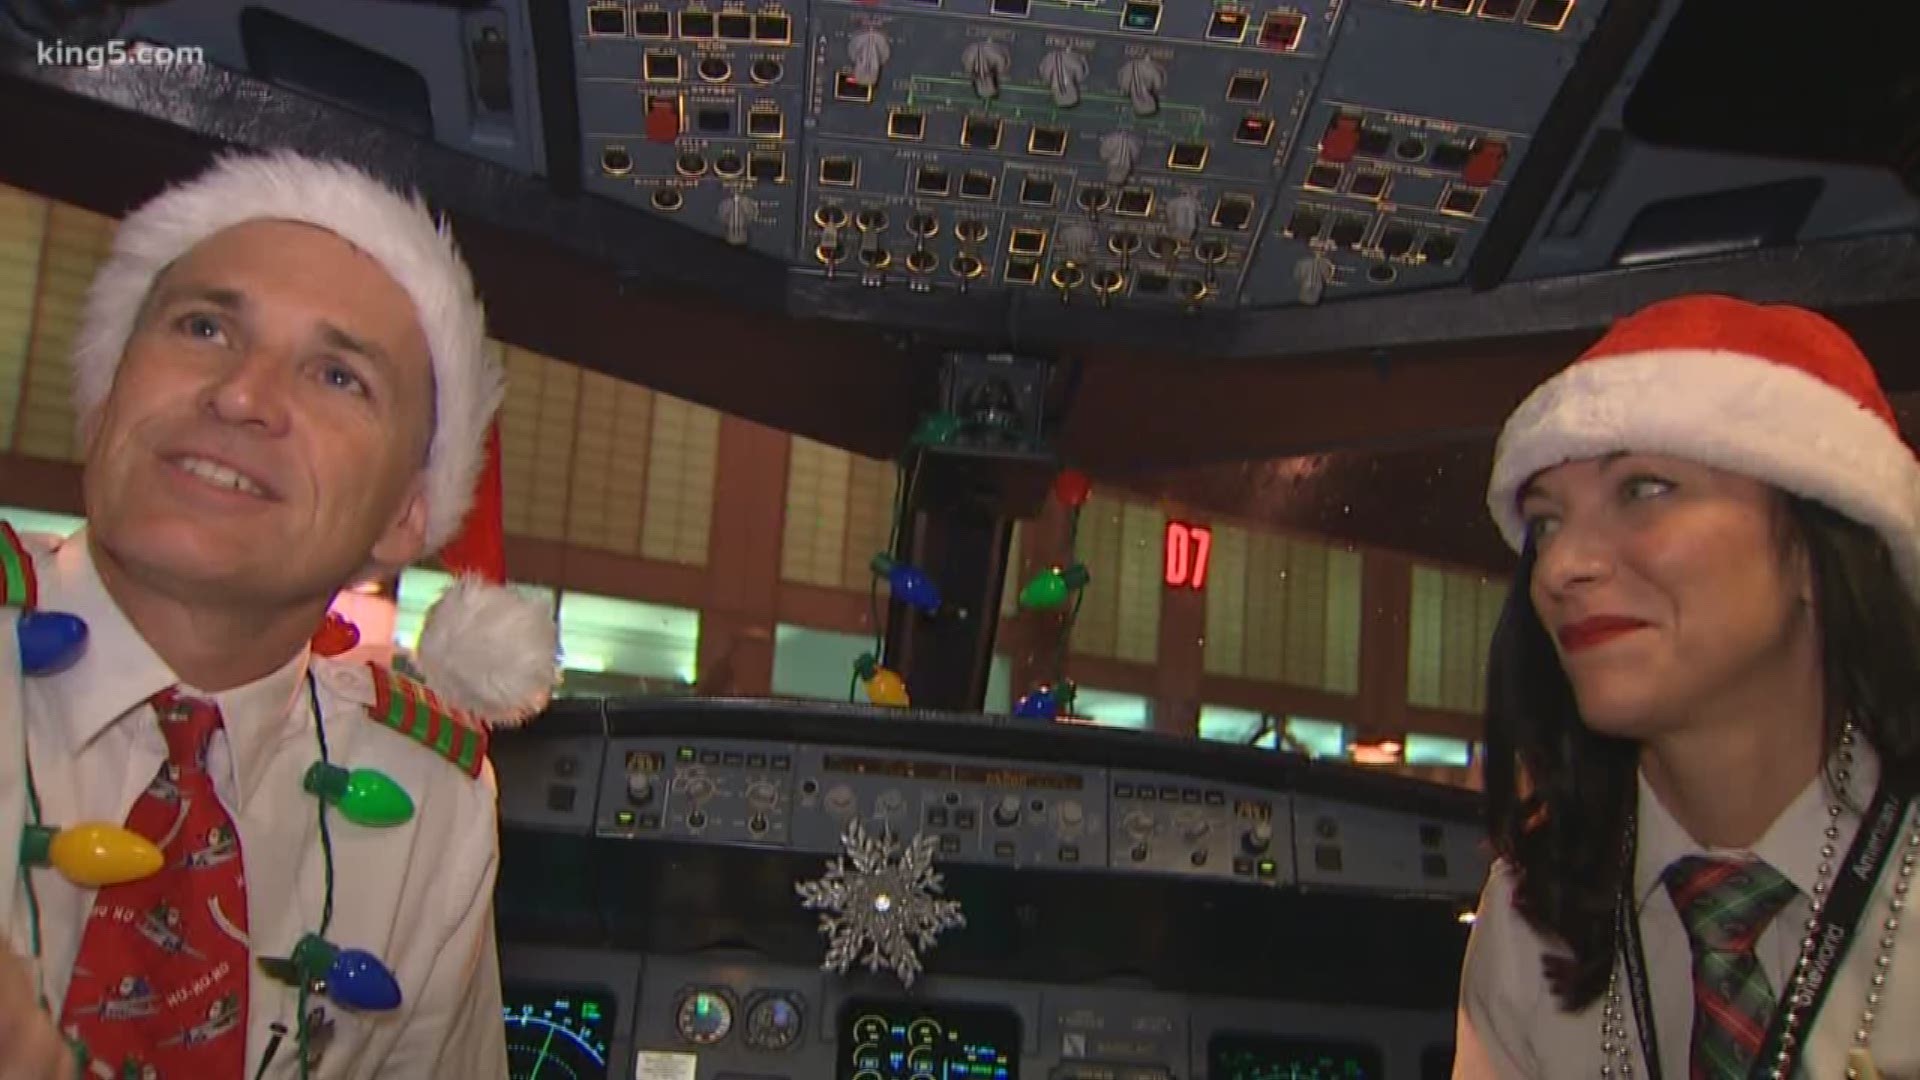 Sea-Tac Airport was one of many stops the Snowball Express made this year to give children of fallen service members a five-day trip filled with fun and fellowship.